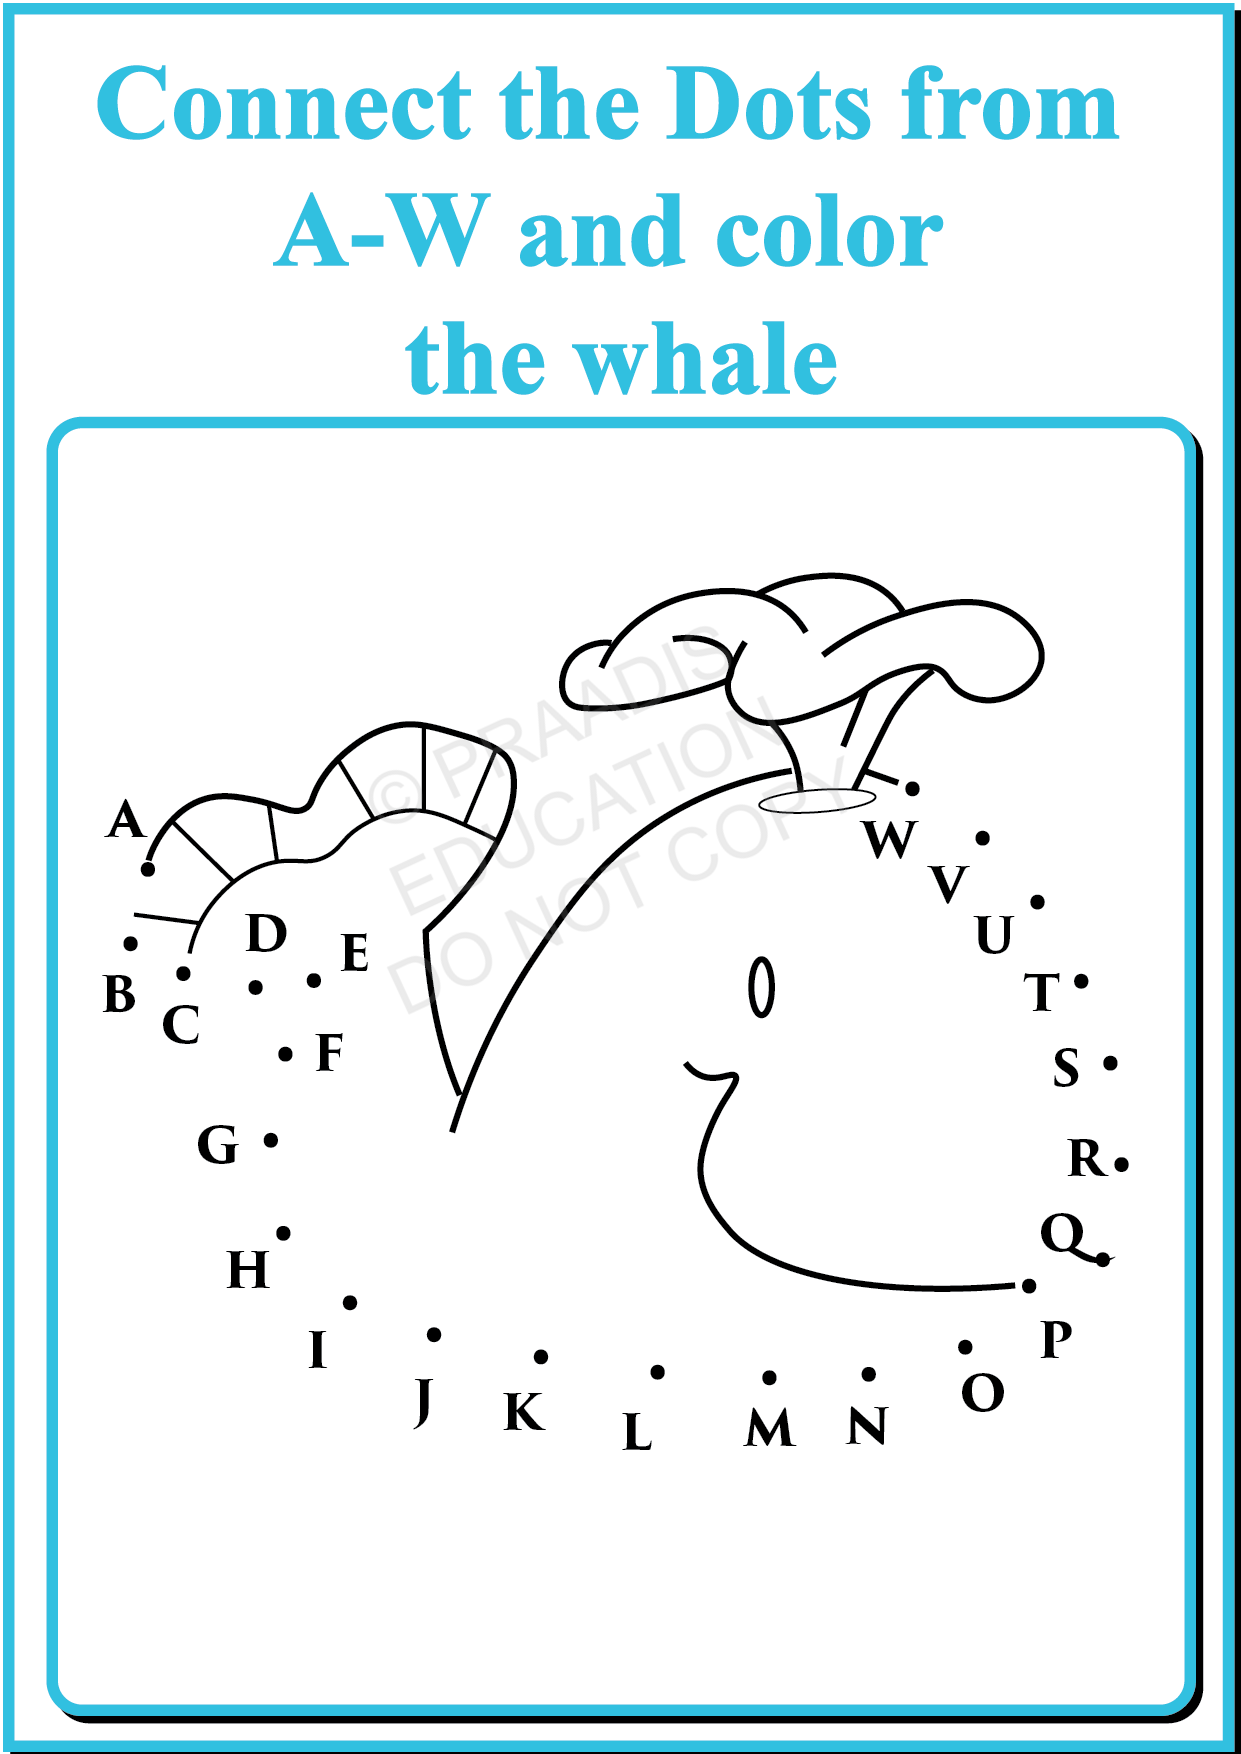 Download And Print Turtle Diary 39 S Draw Line To Match Letters M To R Wo Alphabet Worksheets